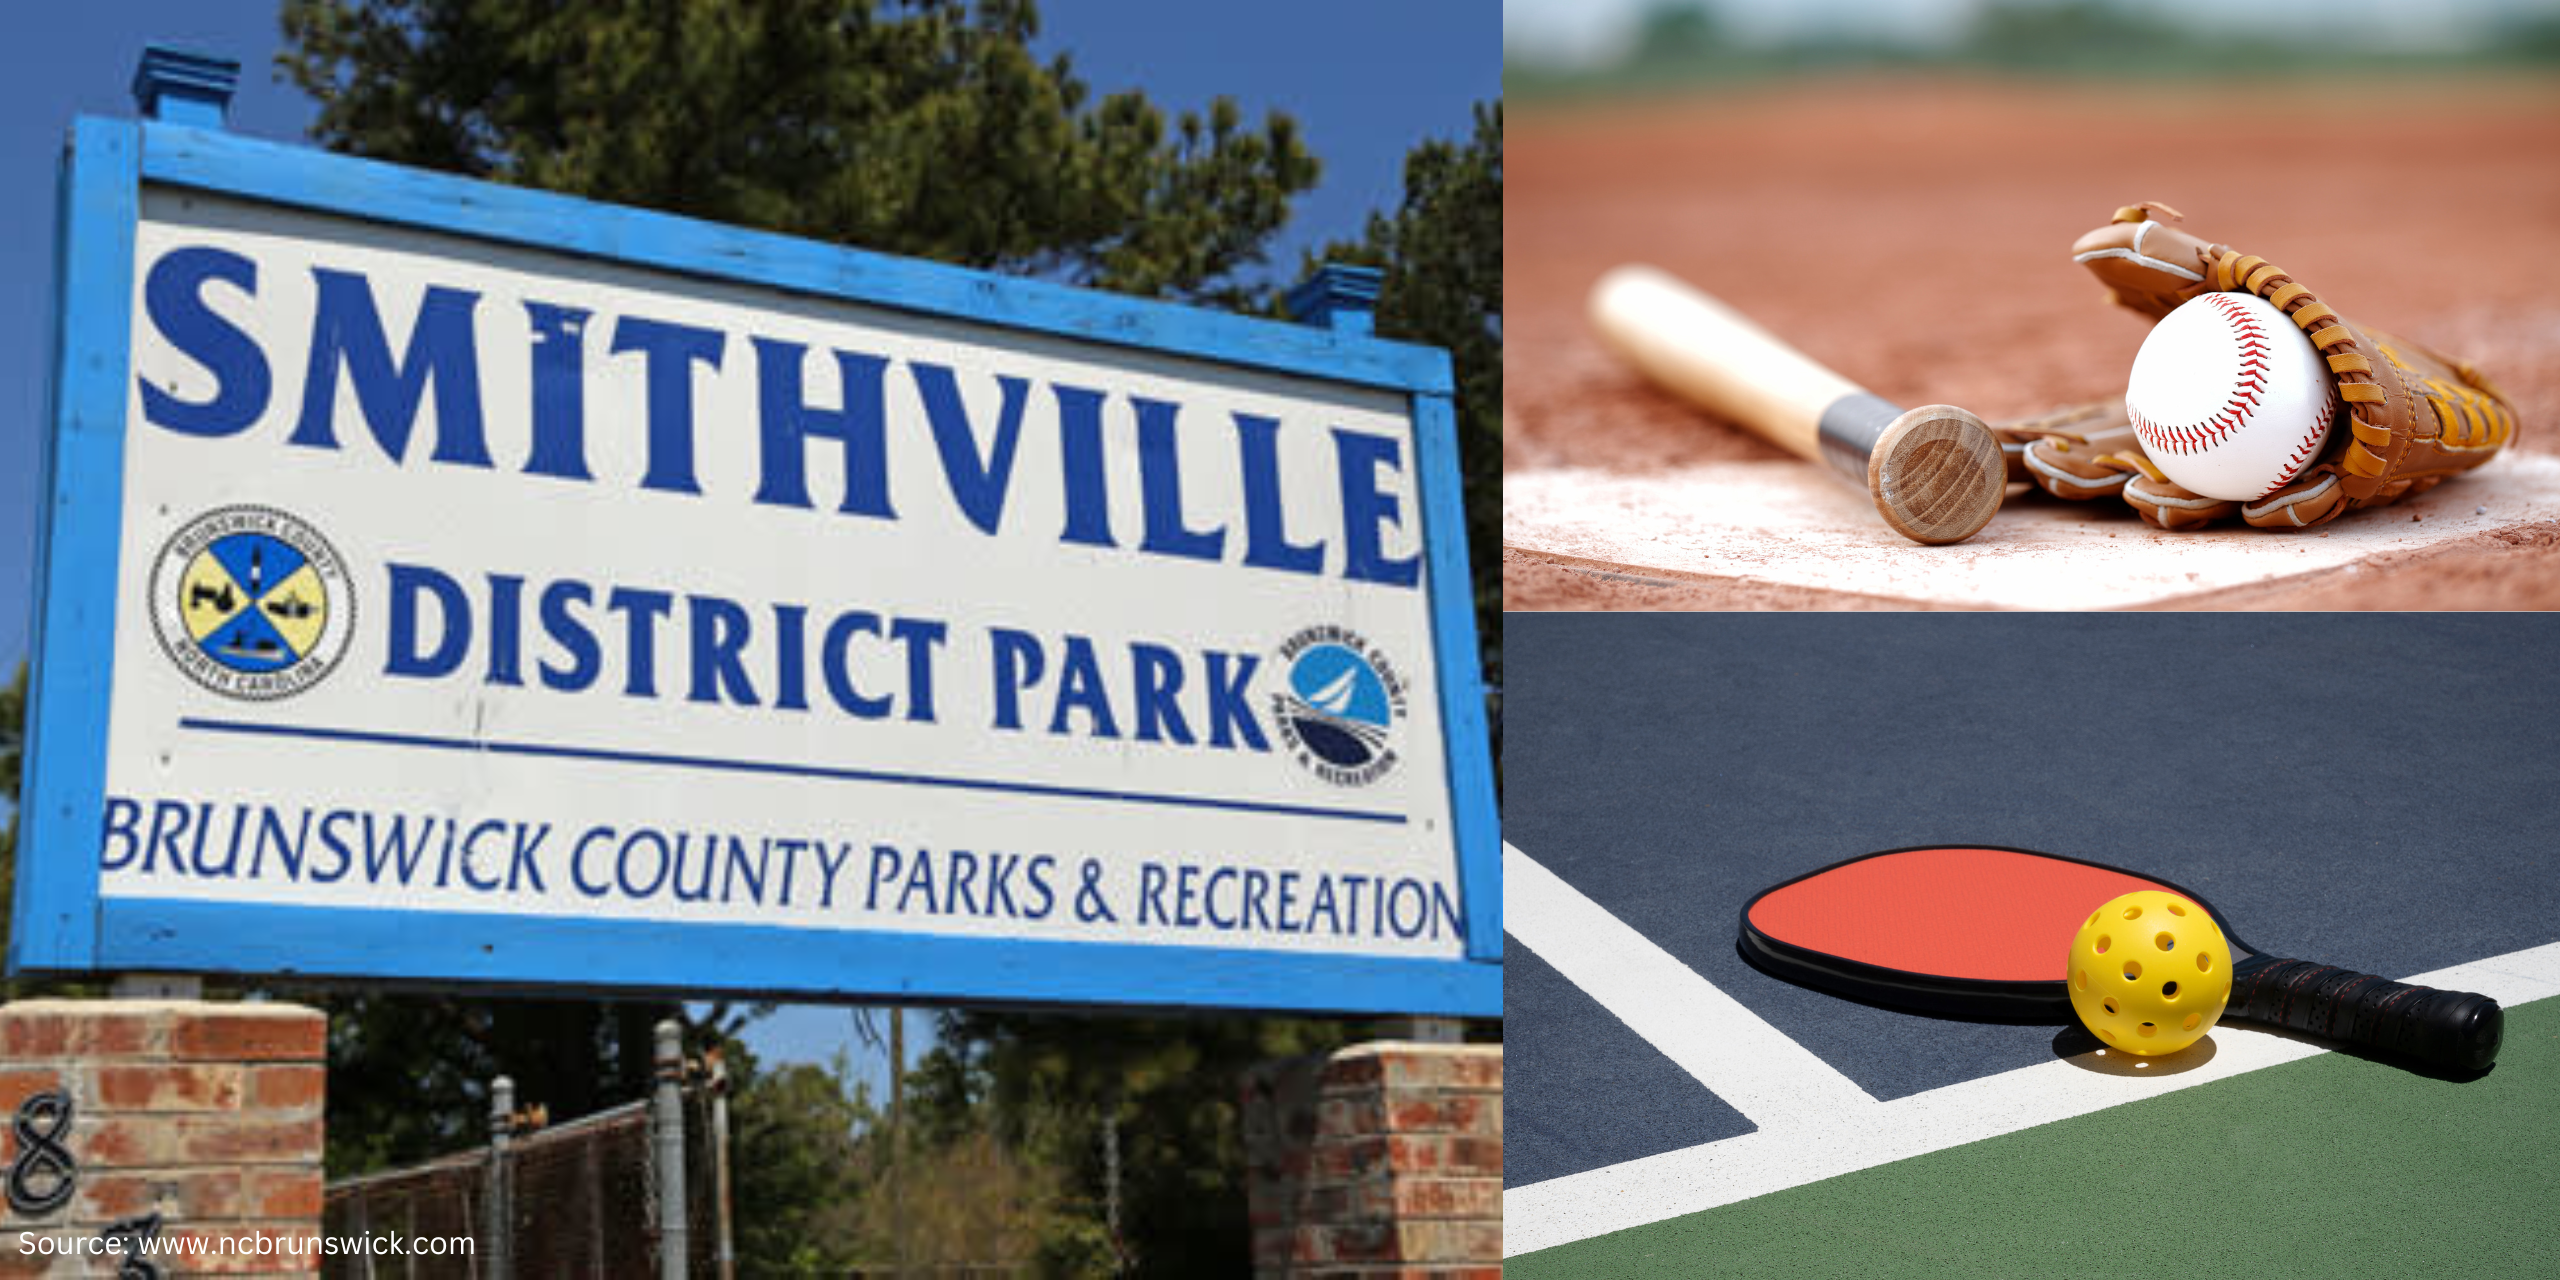 Collage of Smithville district park sign, picture of baseball bat and all, and a picture of pickleball paddle and ball